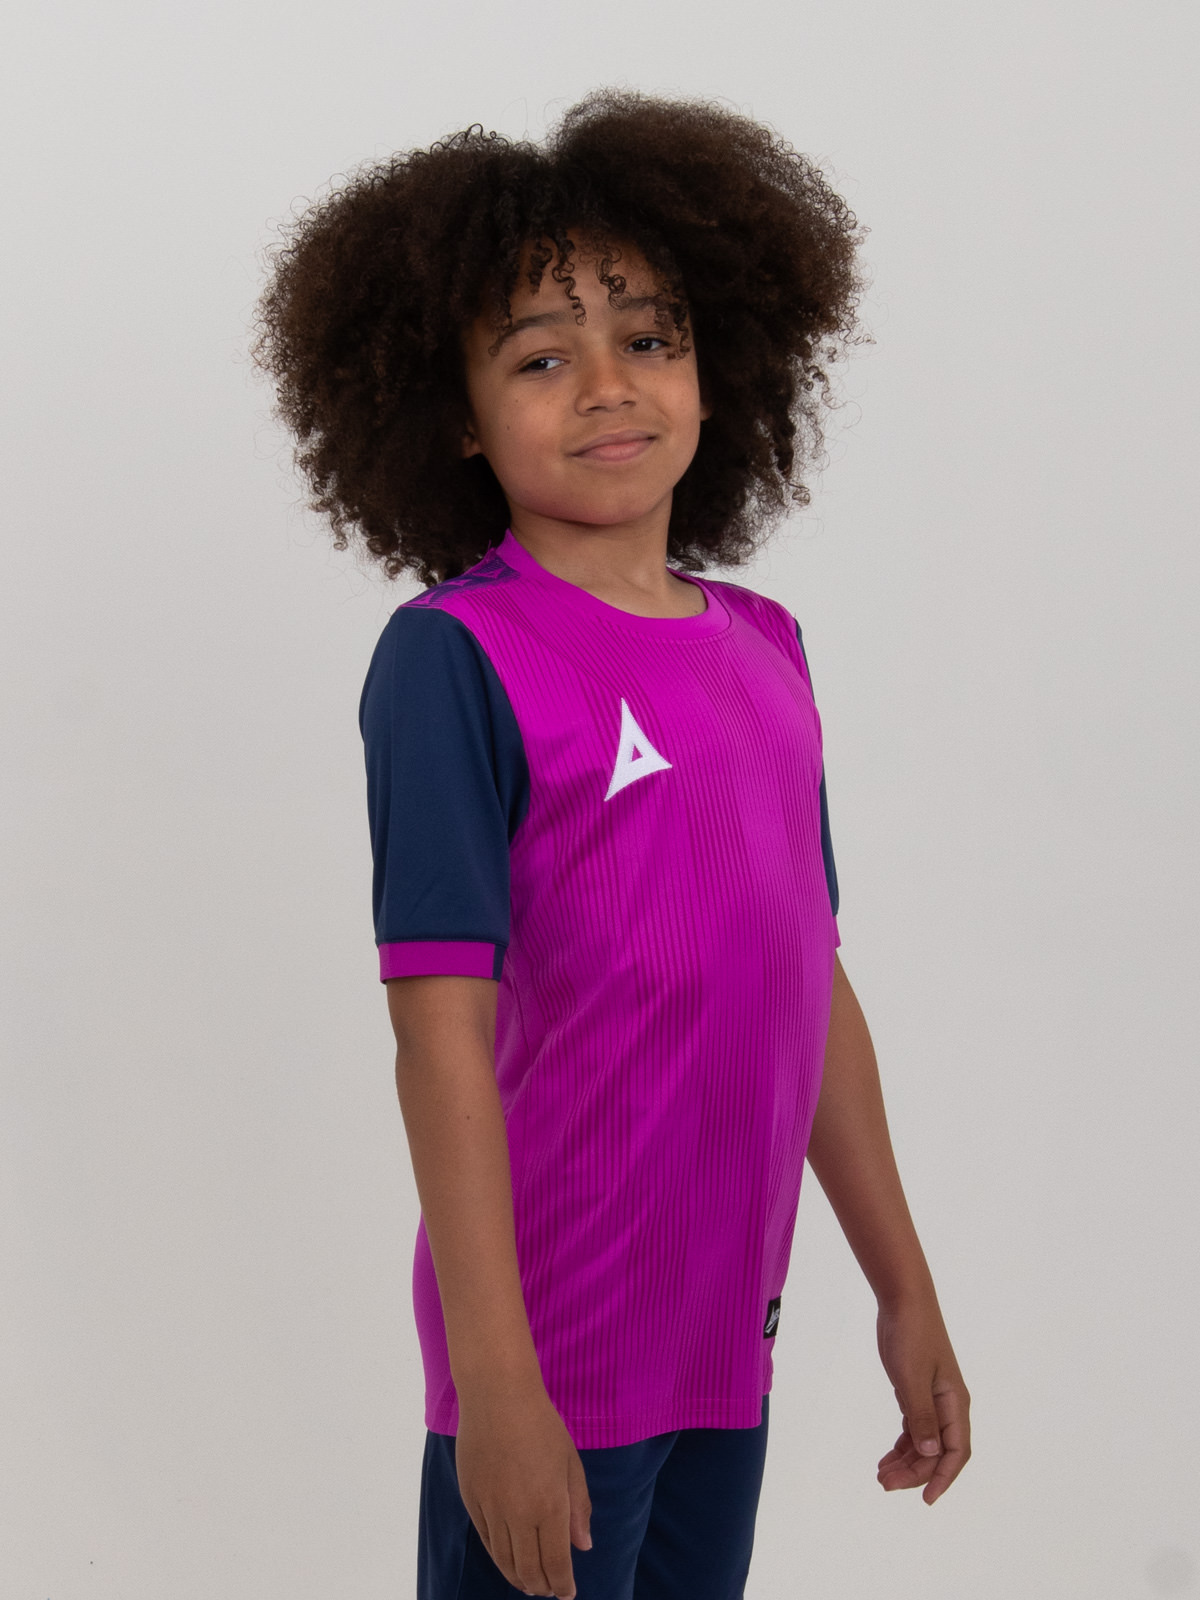 a unique colour colour combination of purple and navy make this football shirt a top choice for kids football teams